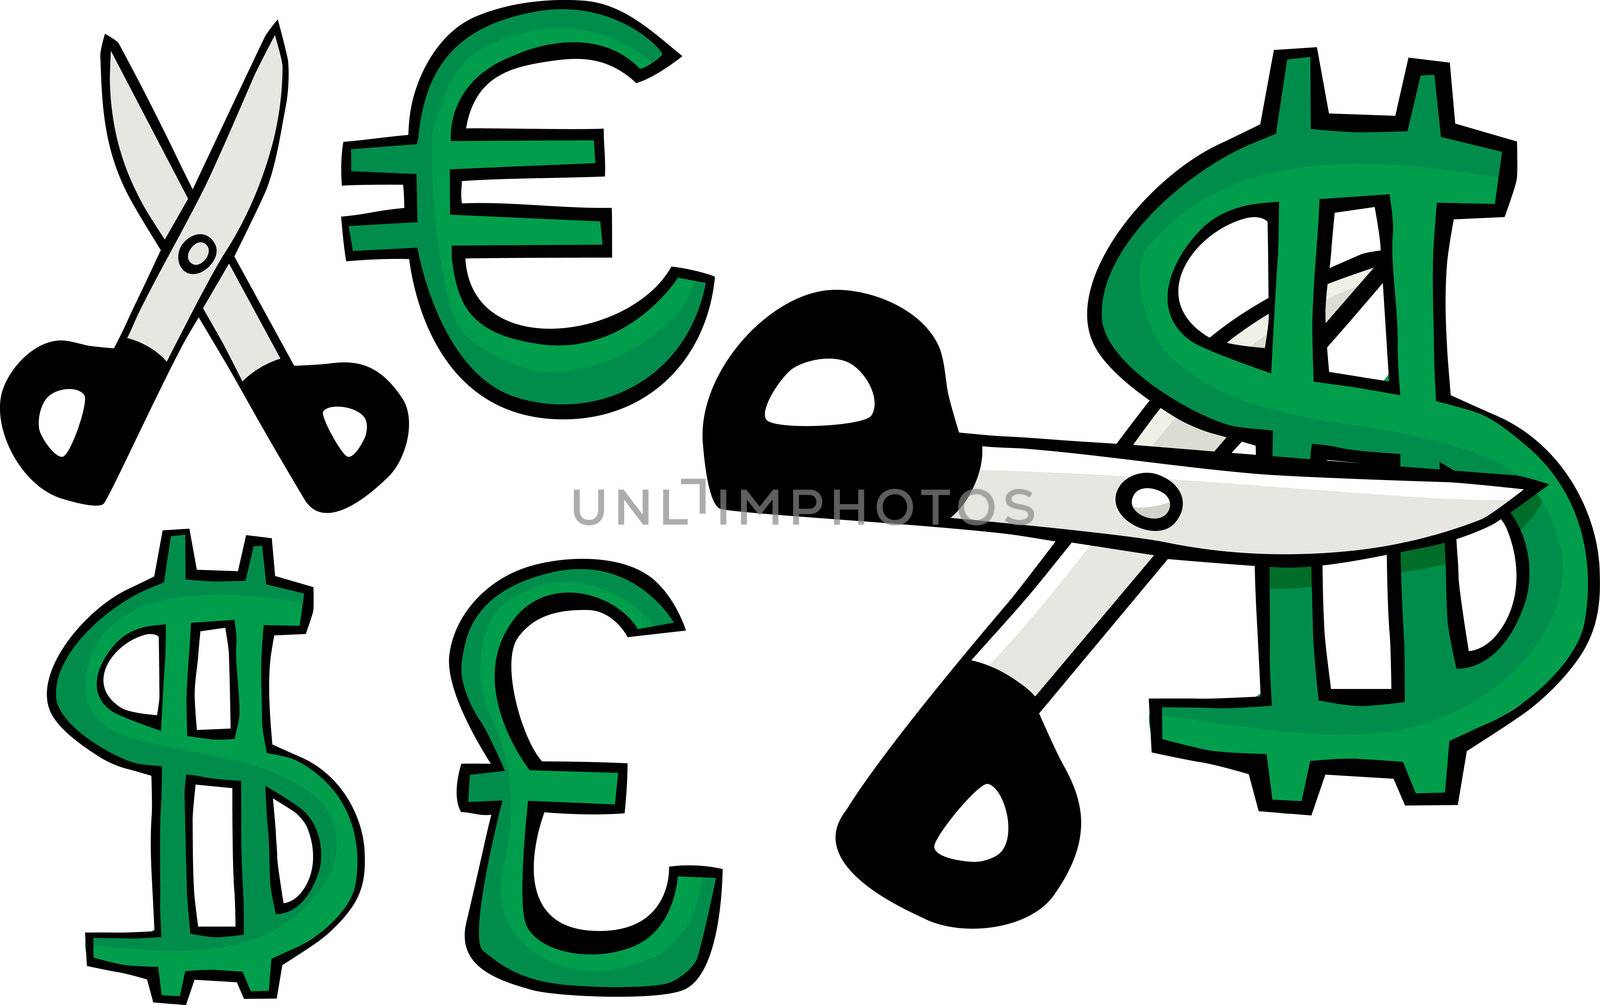 Scissors cuts a symbol of the United States dollar, Euro or British Pound Sterling